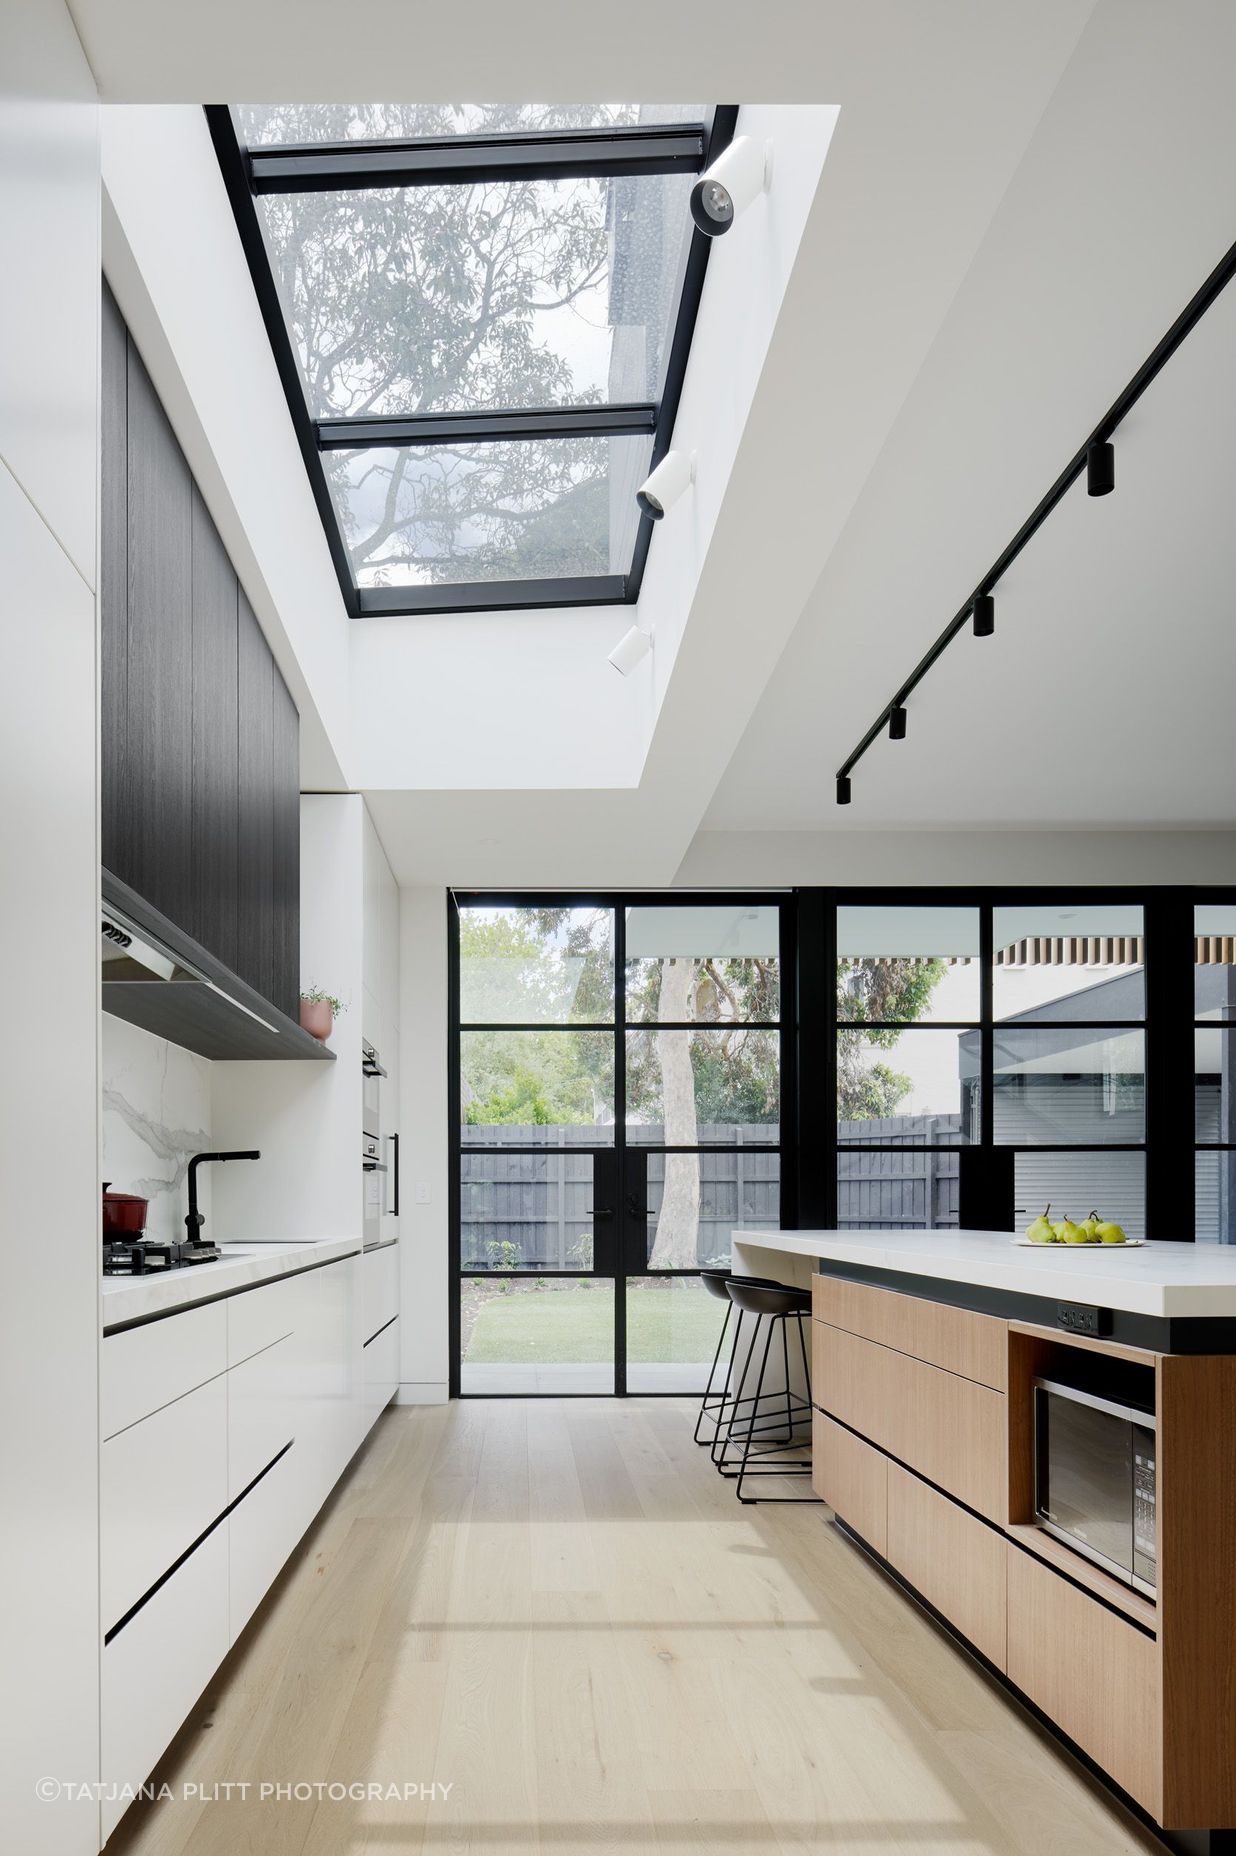 A skylight allows natural light to flow into the kitchen.